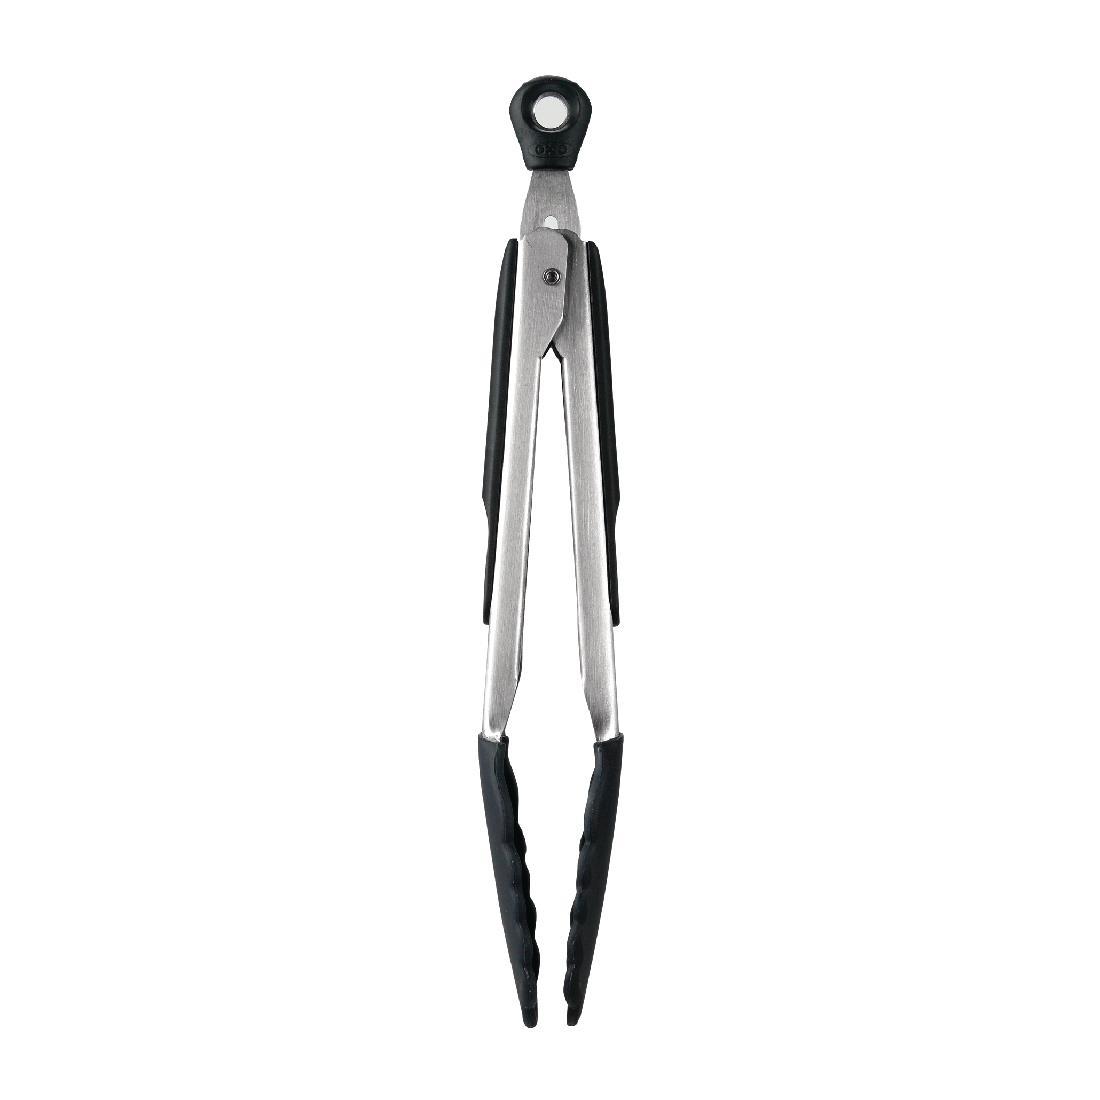 OXO Good Grips Locking Tongs with Silicone 9" - GG064  - 1